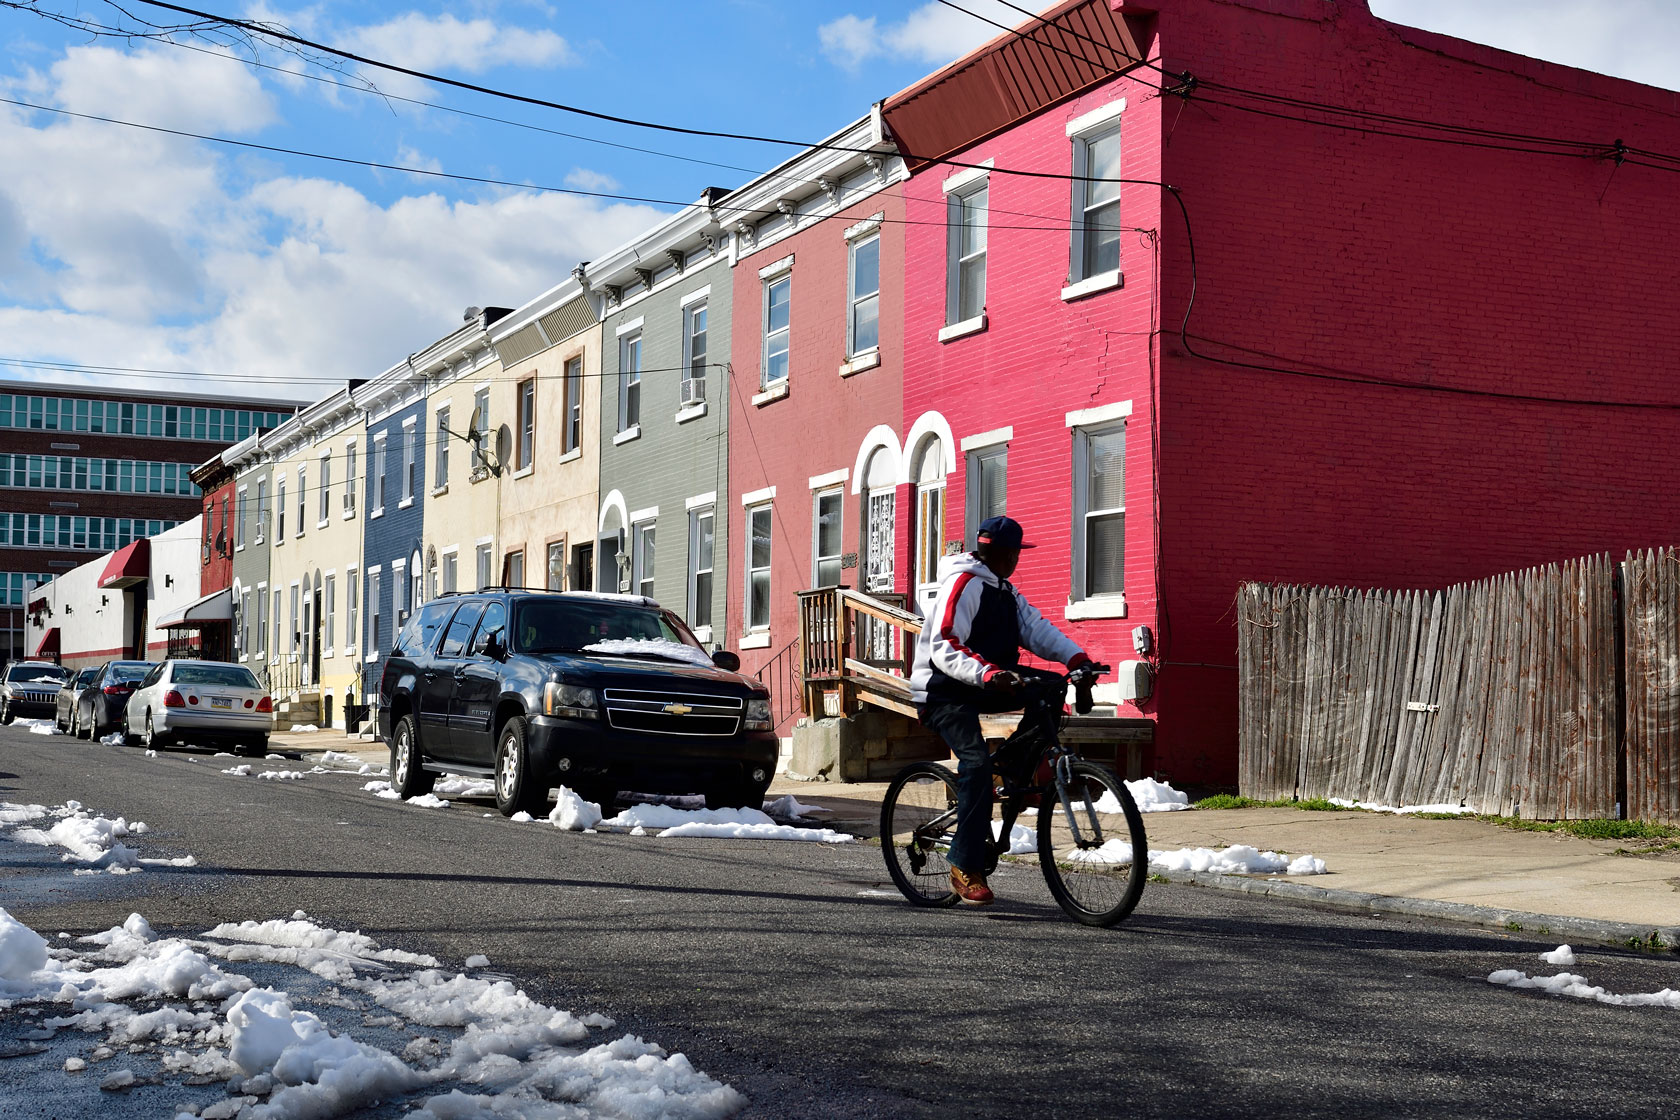 A man bicycles past a row of houses in Philadelphia.